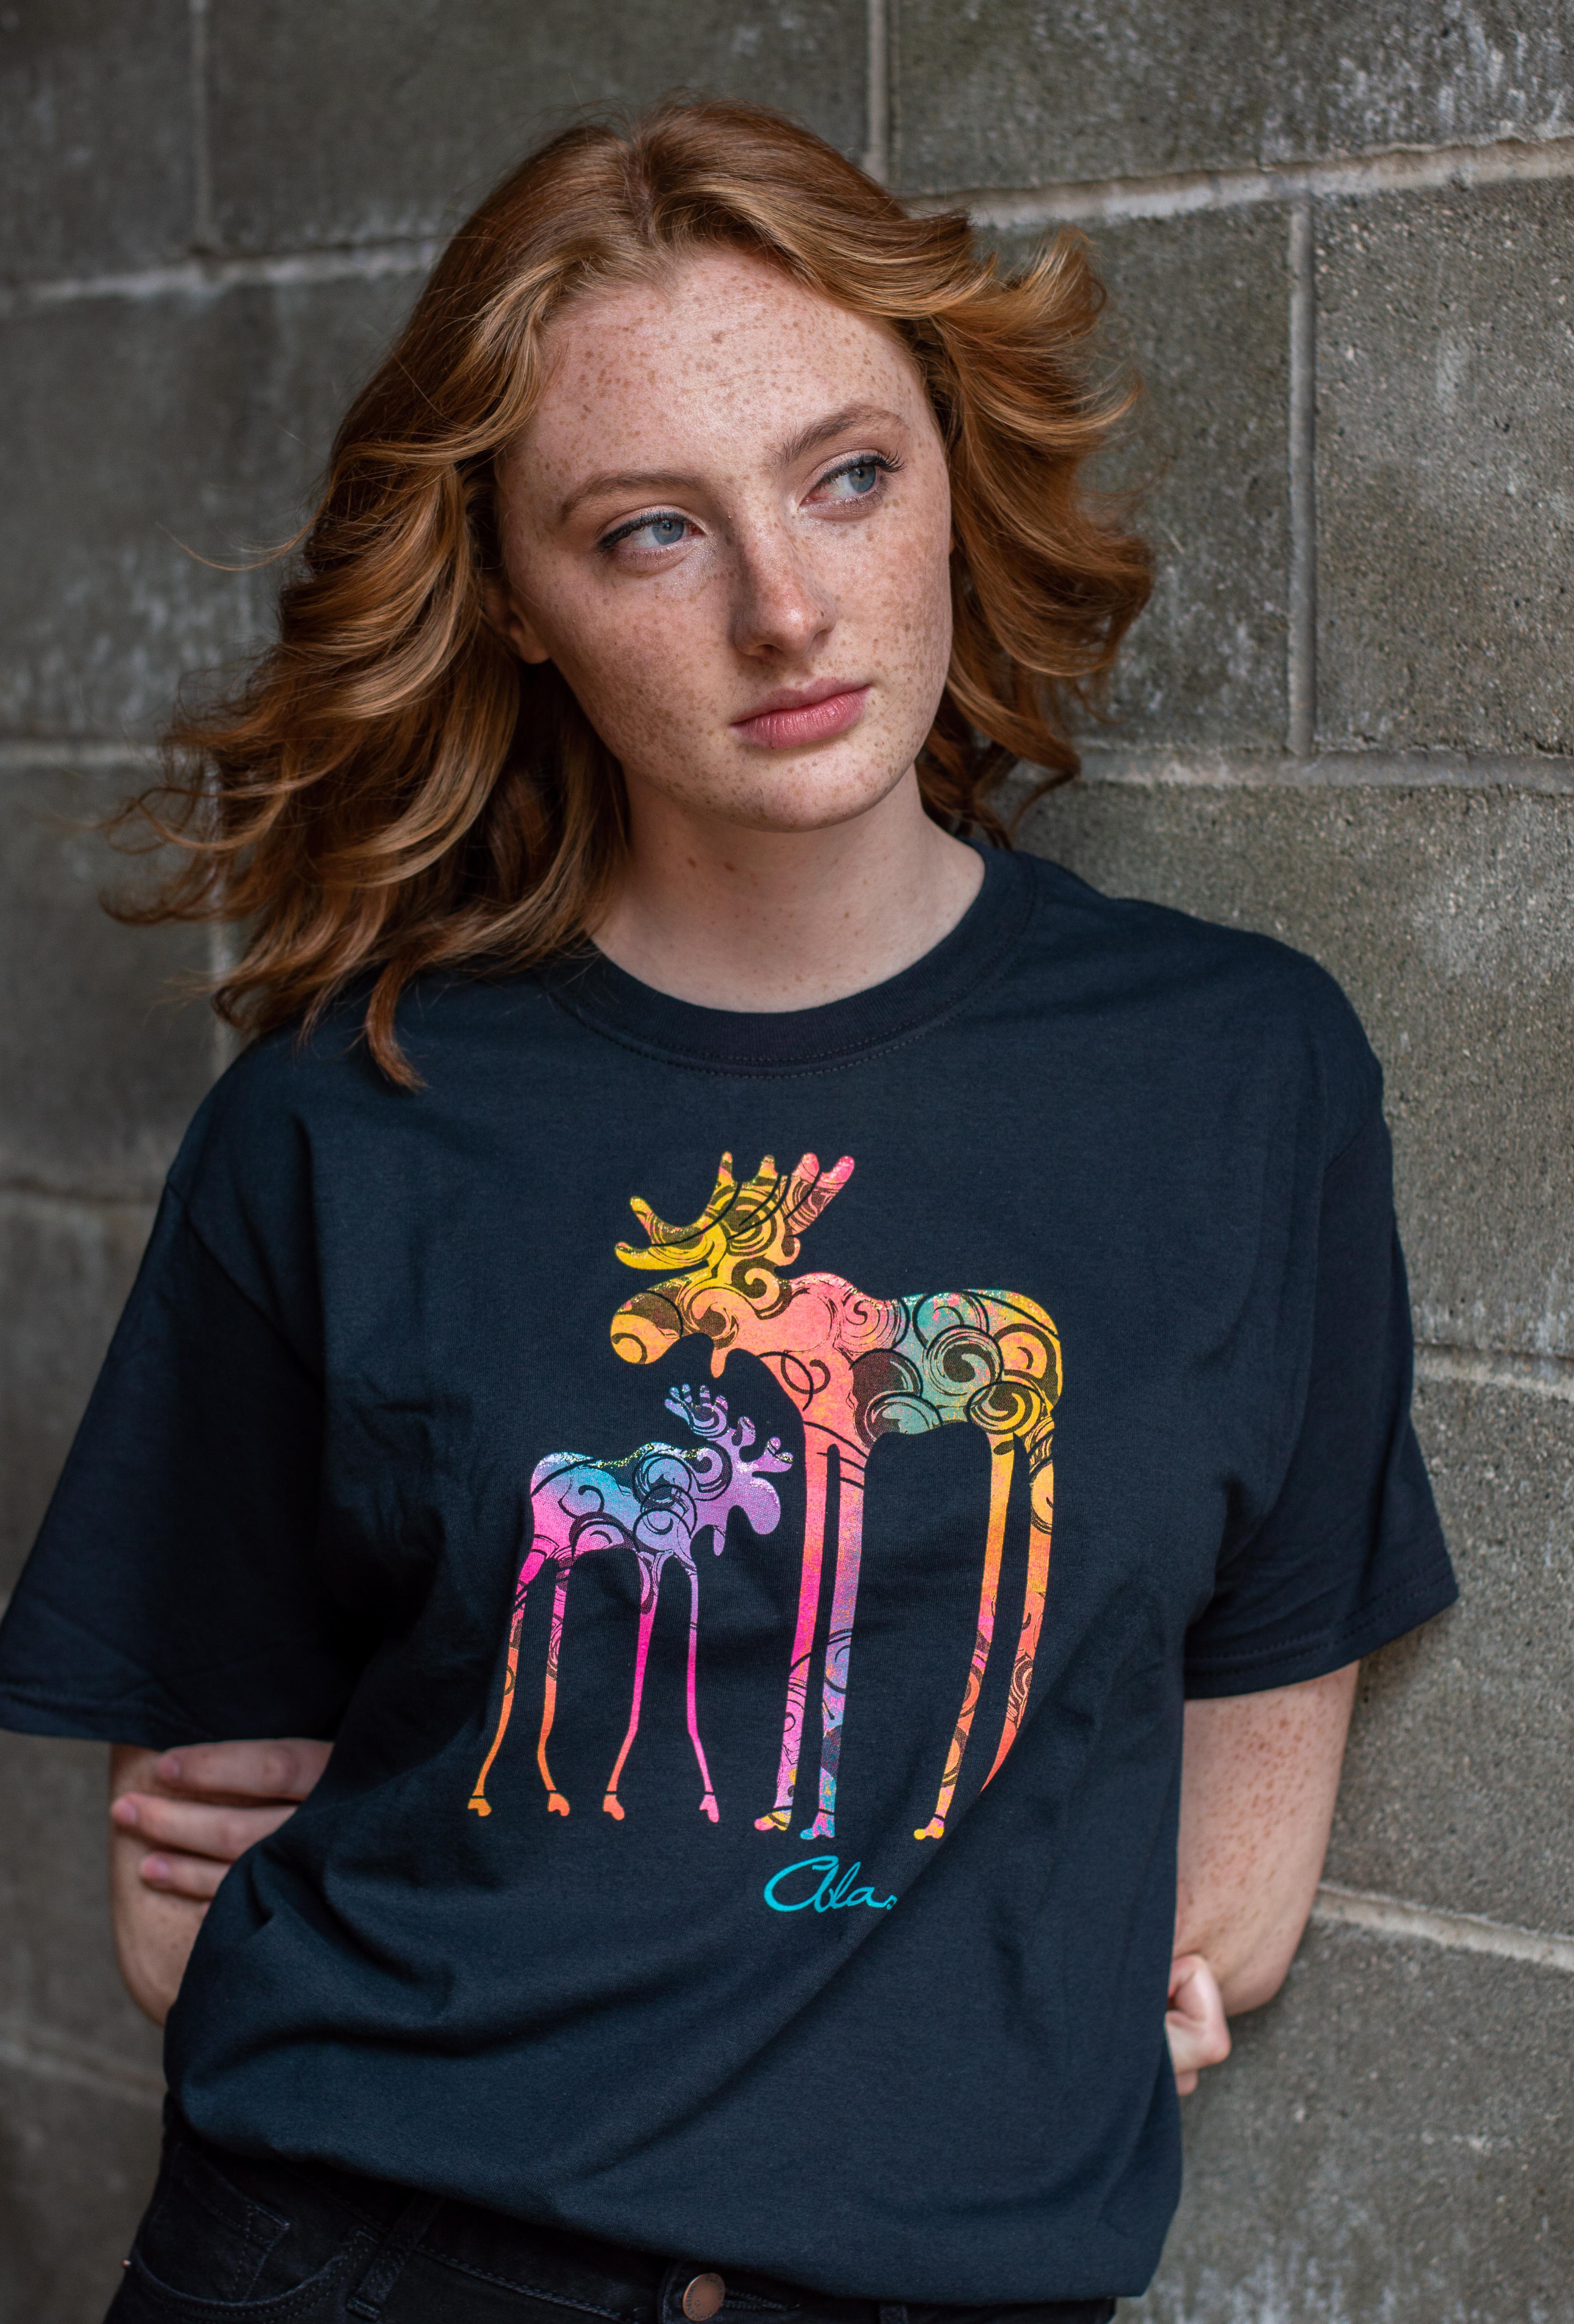  L's Whimisical Moose Tee